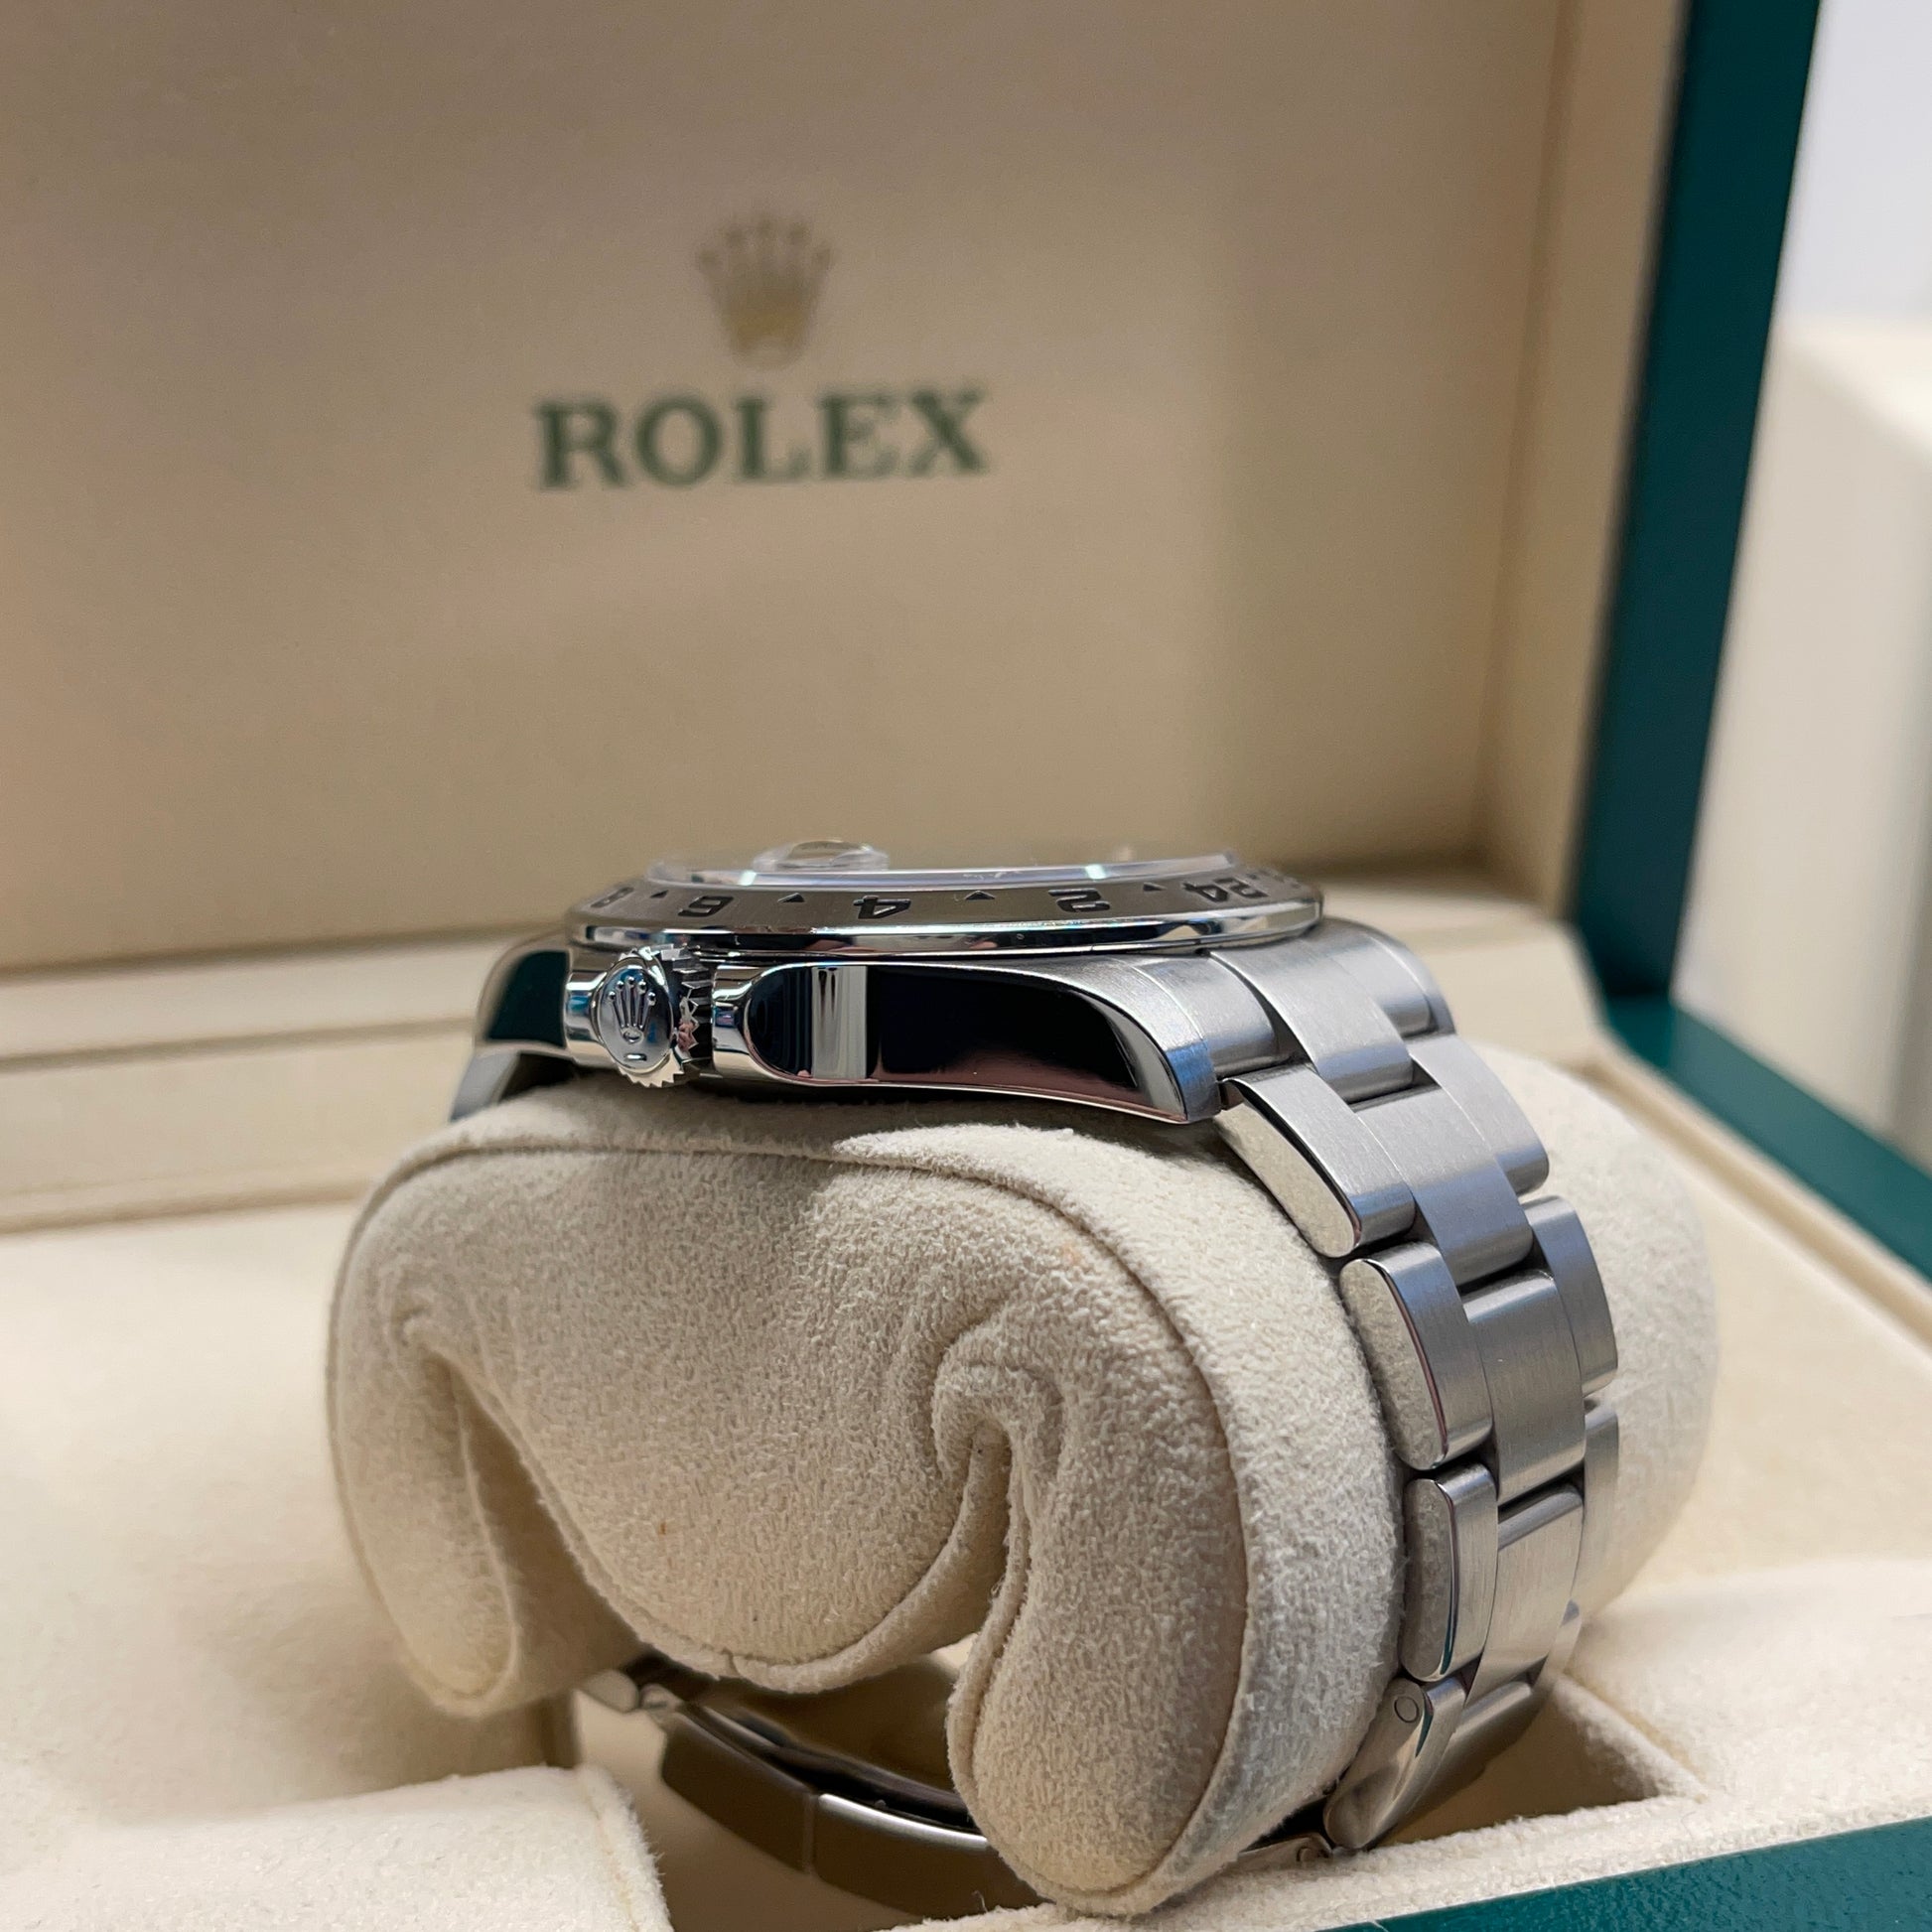 2014 Rolex Explorer II 216570 Stainless Steel GMT Oyster Black Wristwatch Box Papers - Hashtag Watch Company